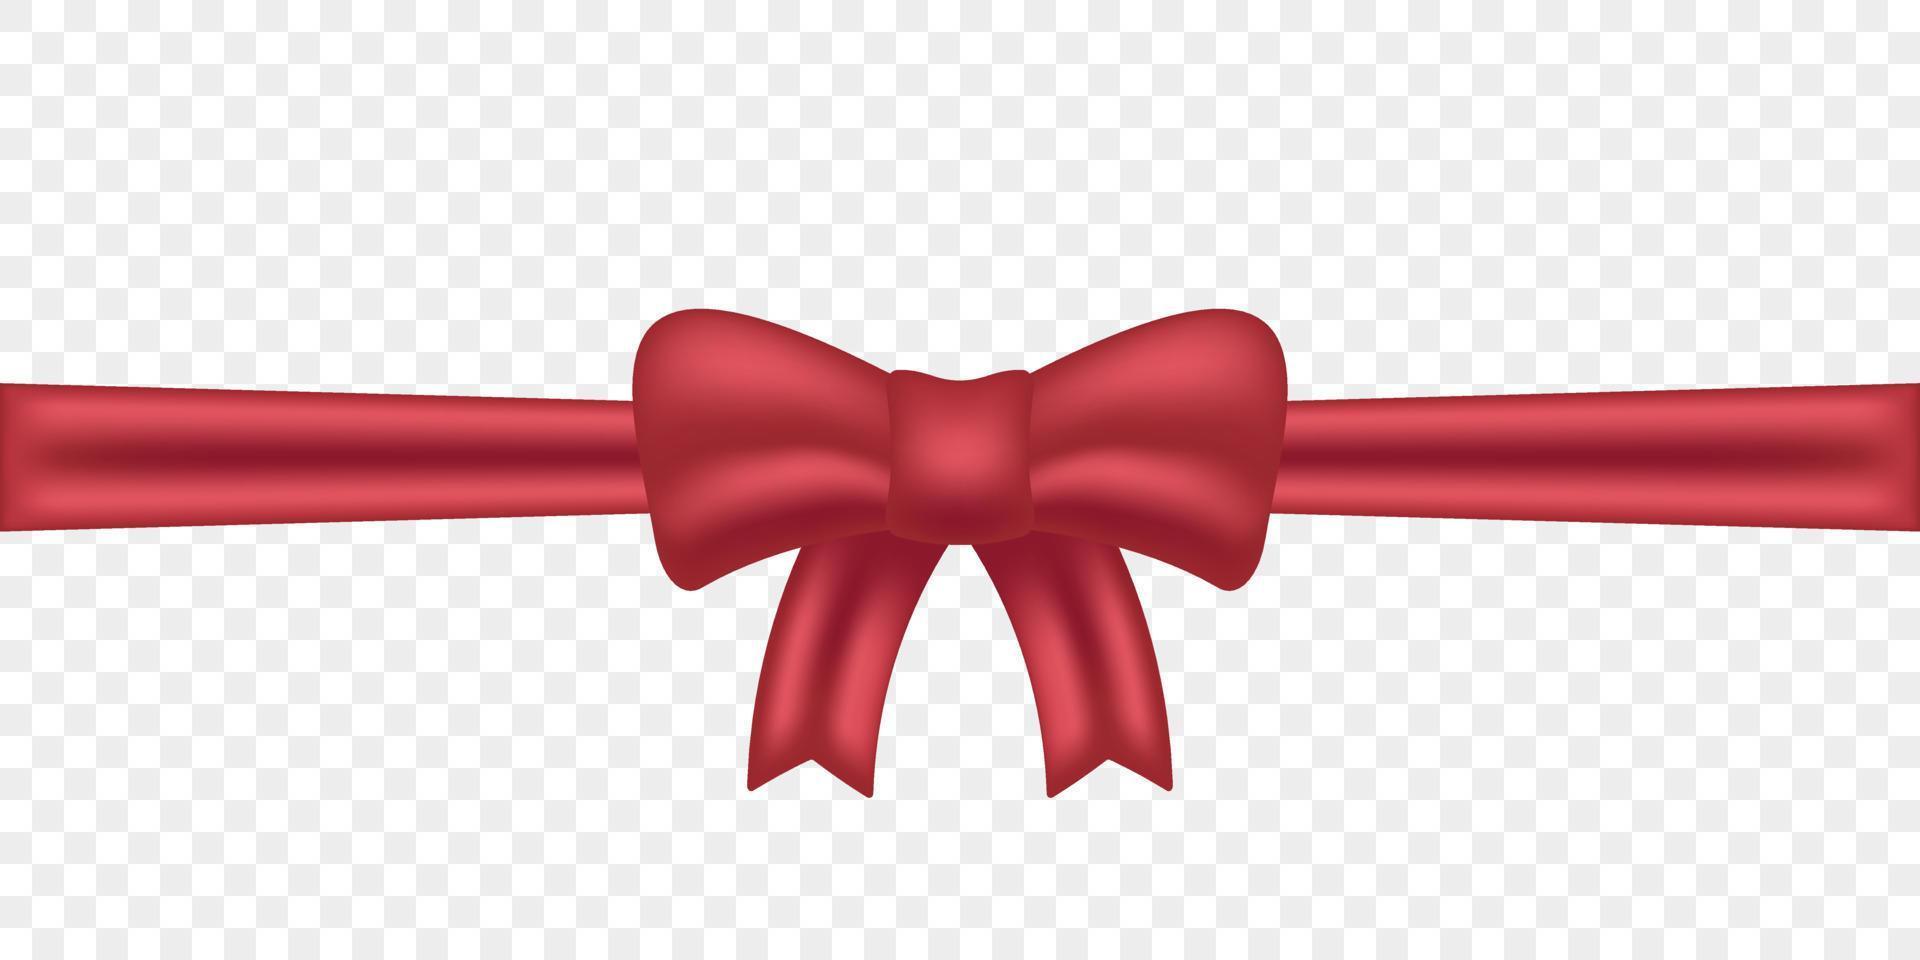 Decorative Red Bow with Horizontal Ribbon. Realistic Red Bow Template for Greeting Card or Brochure. Satin Tape Knot, Strip for Gift Package on Christmas. Vector Illustration.